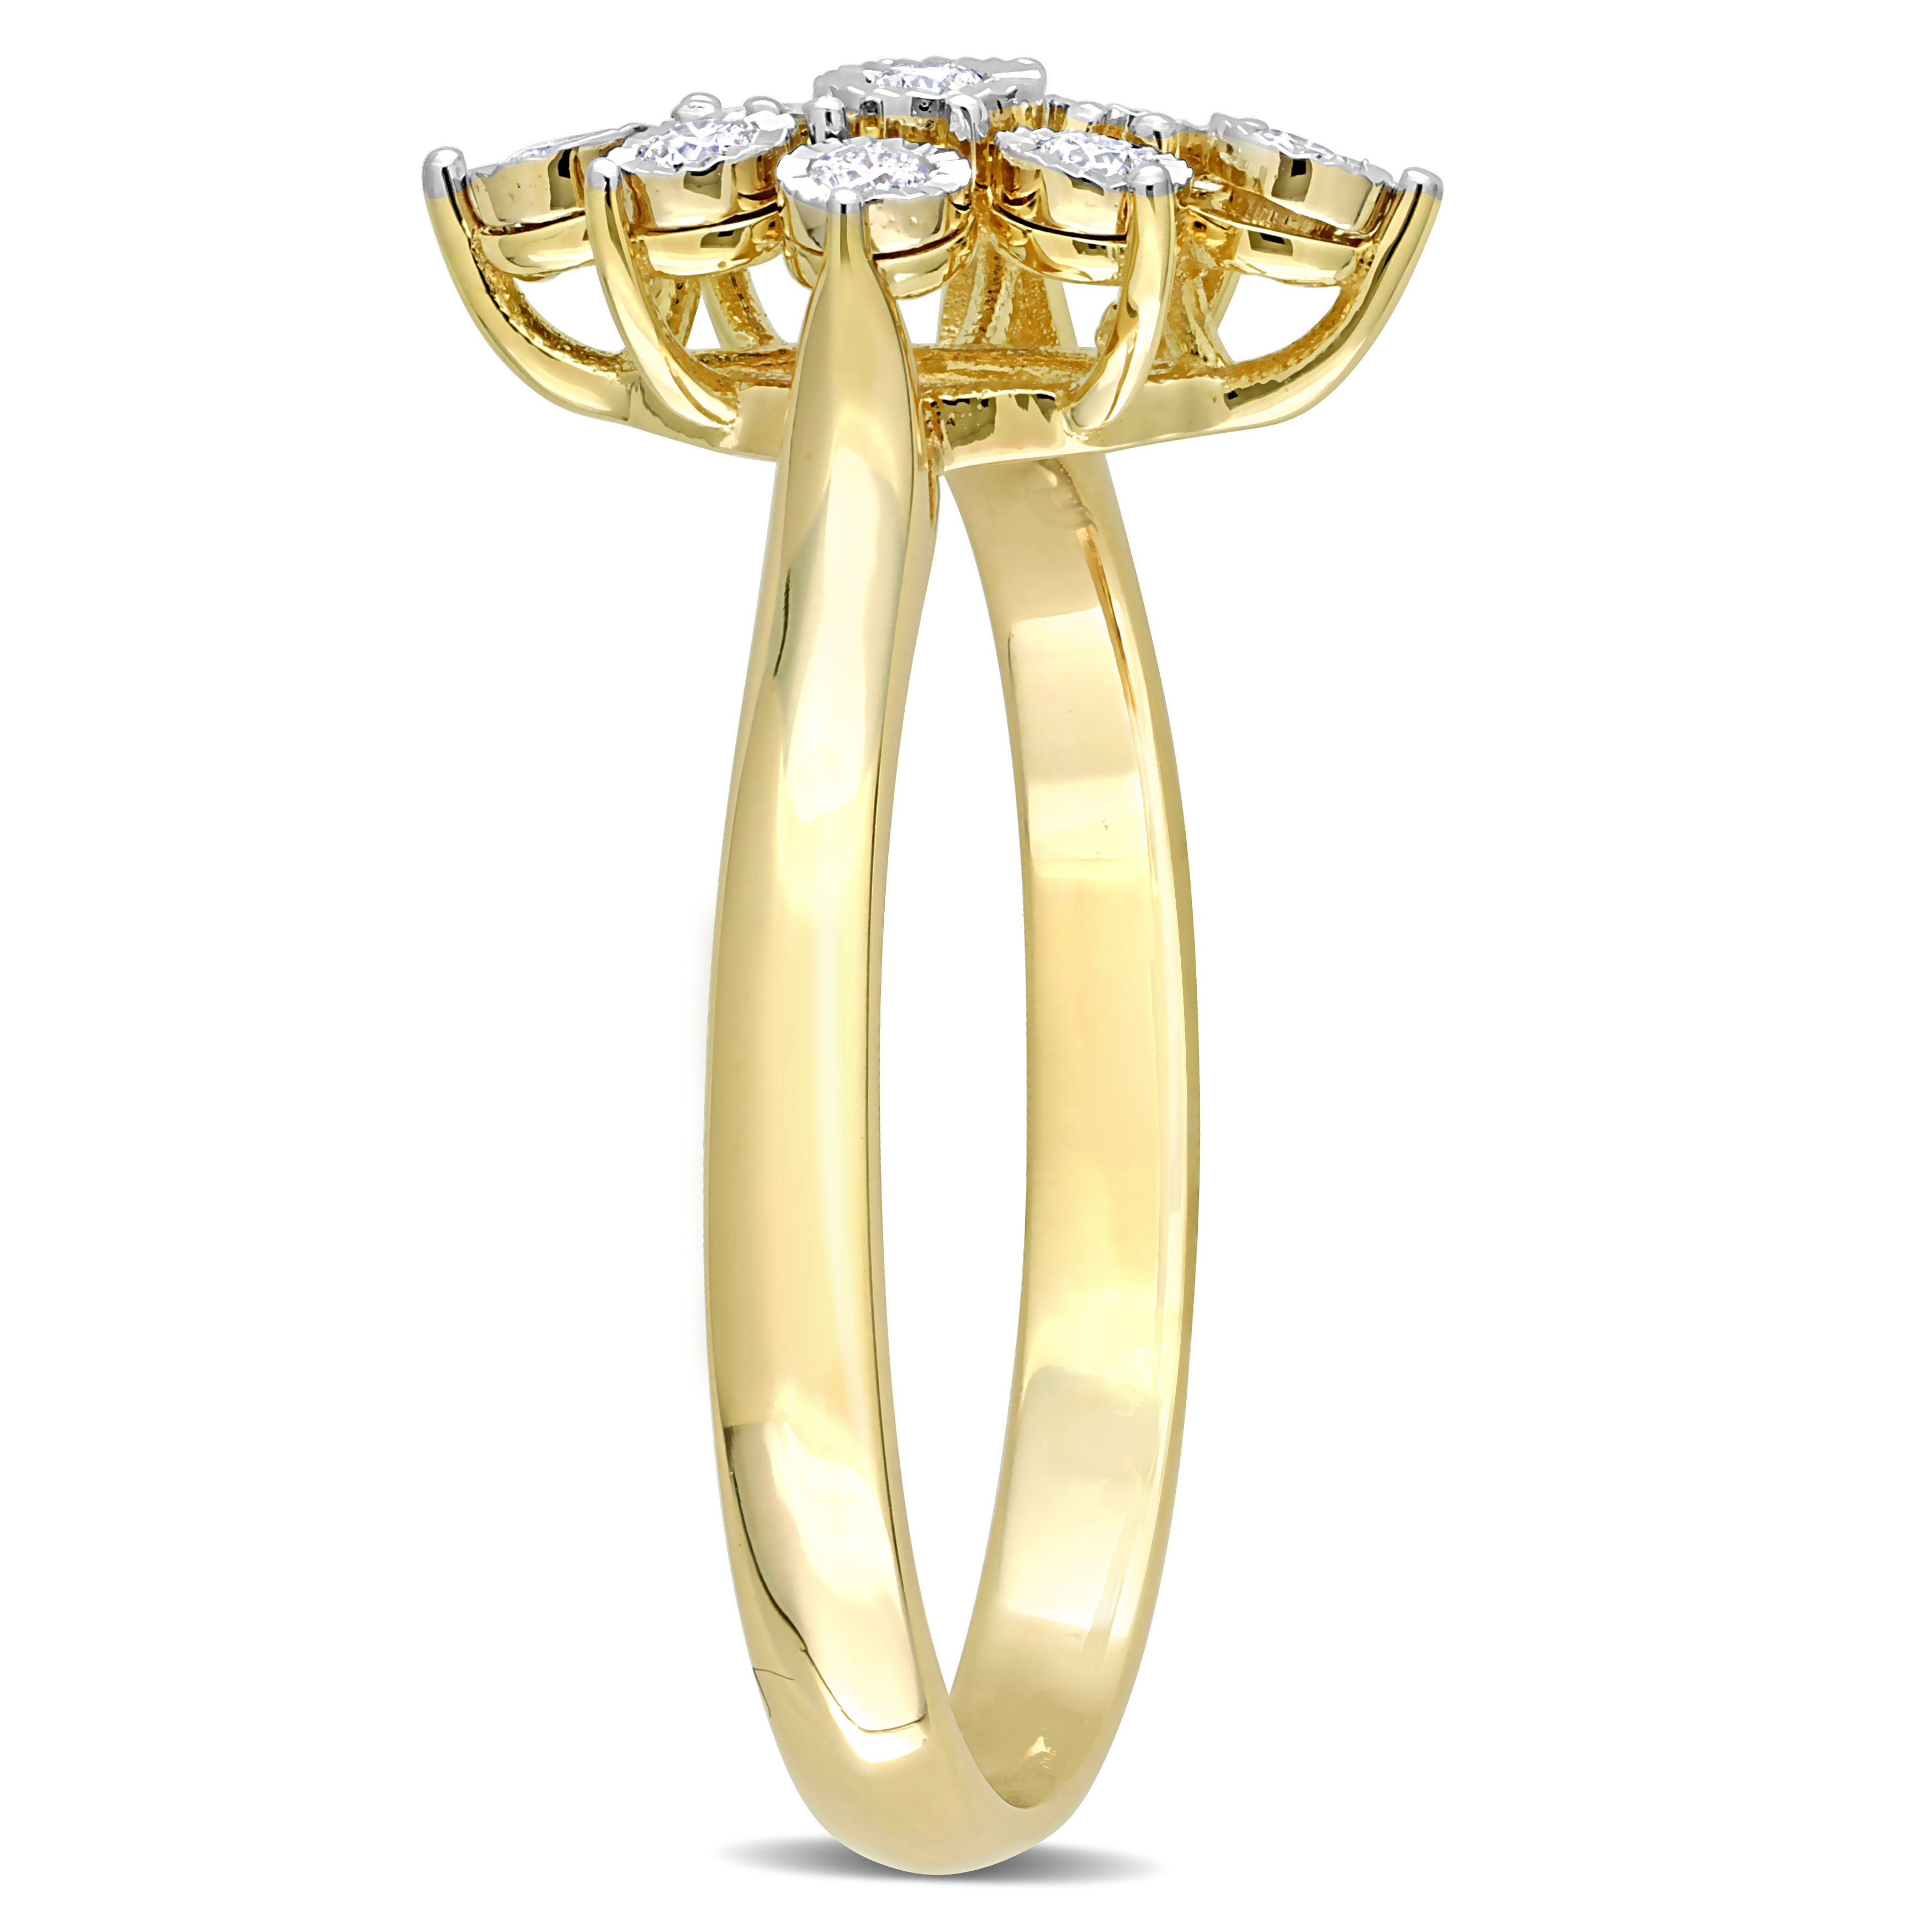 1/8 CT TDW Diamond Astral Ring in 14k Two-Tone White and Yellow Gold